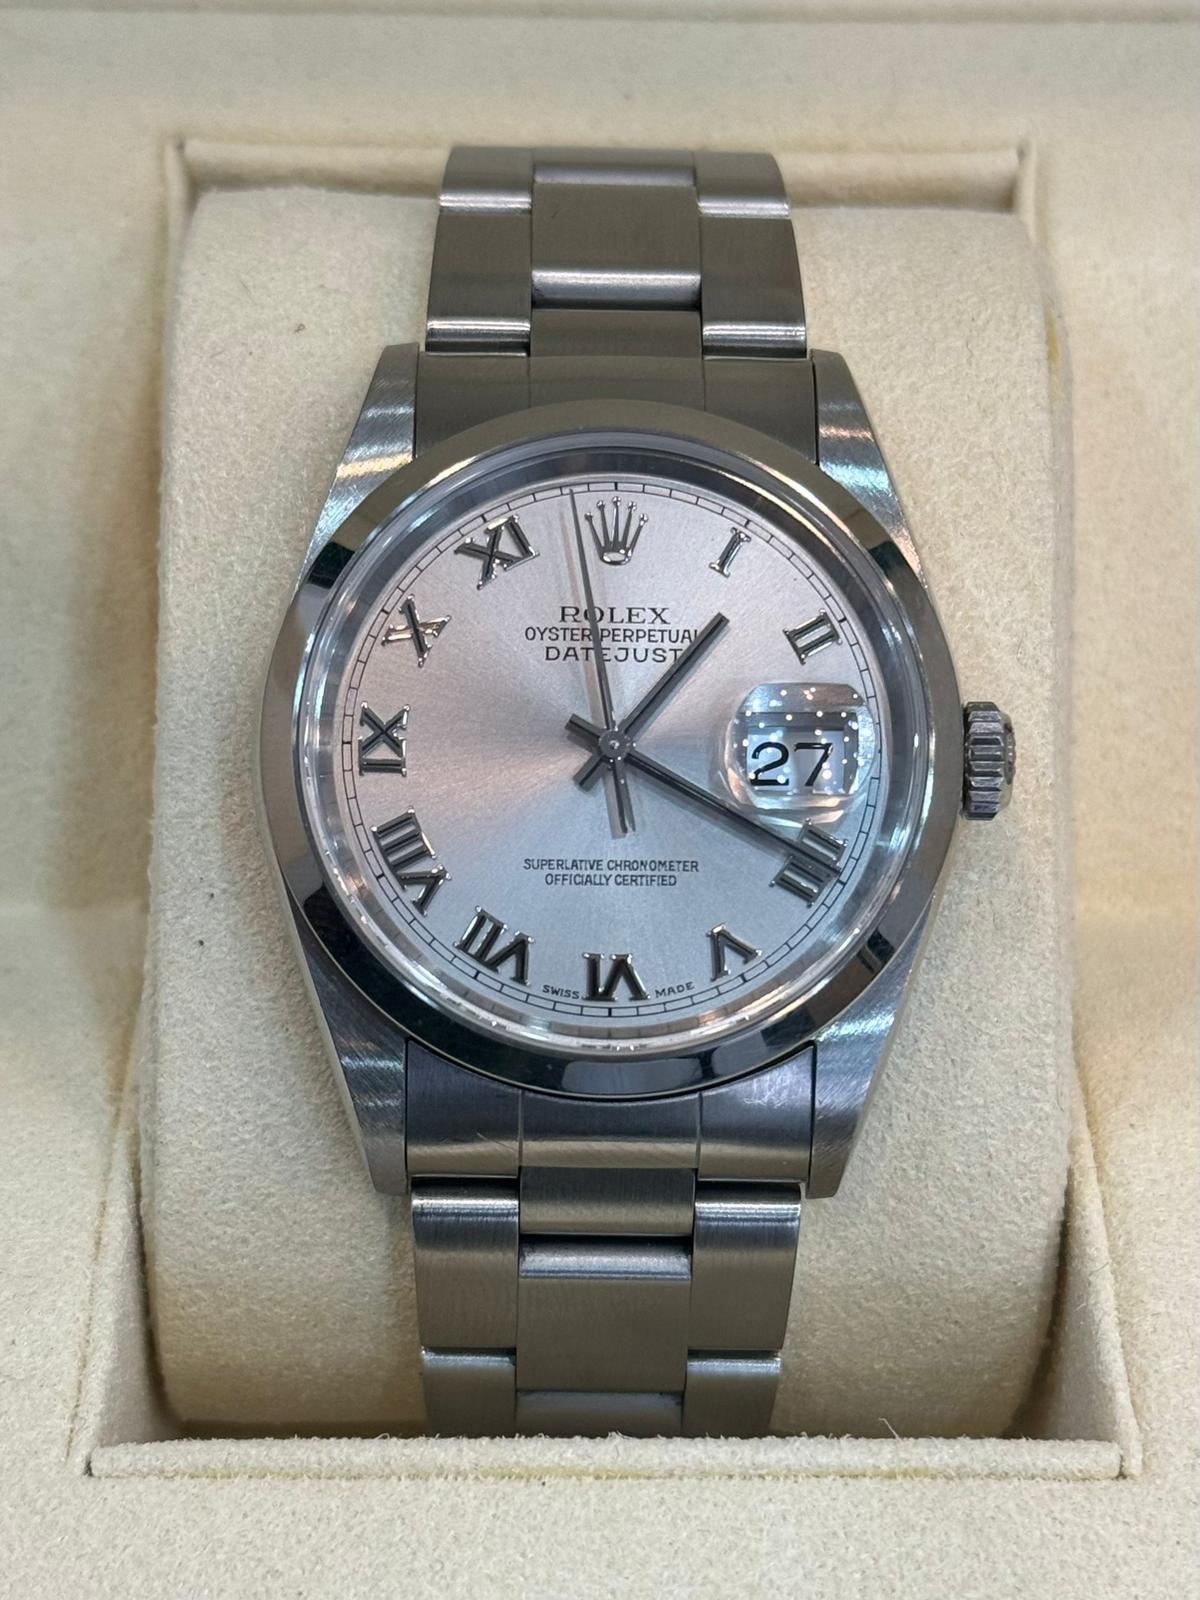 ROLEX DATEJUST 36mm STAINLESS STEEL (BOX & PAPERS) SILVER ROMAN NUMERAL DIAL - Image 2 of 6